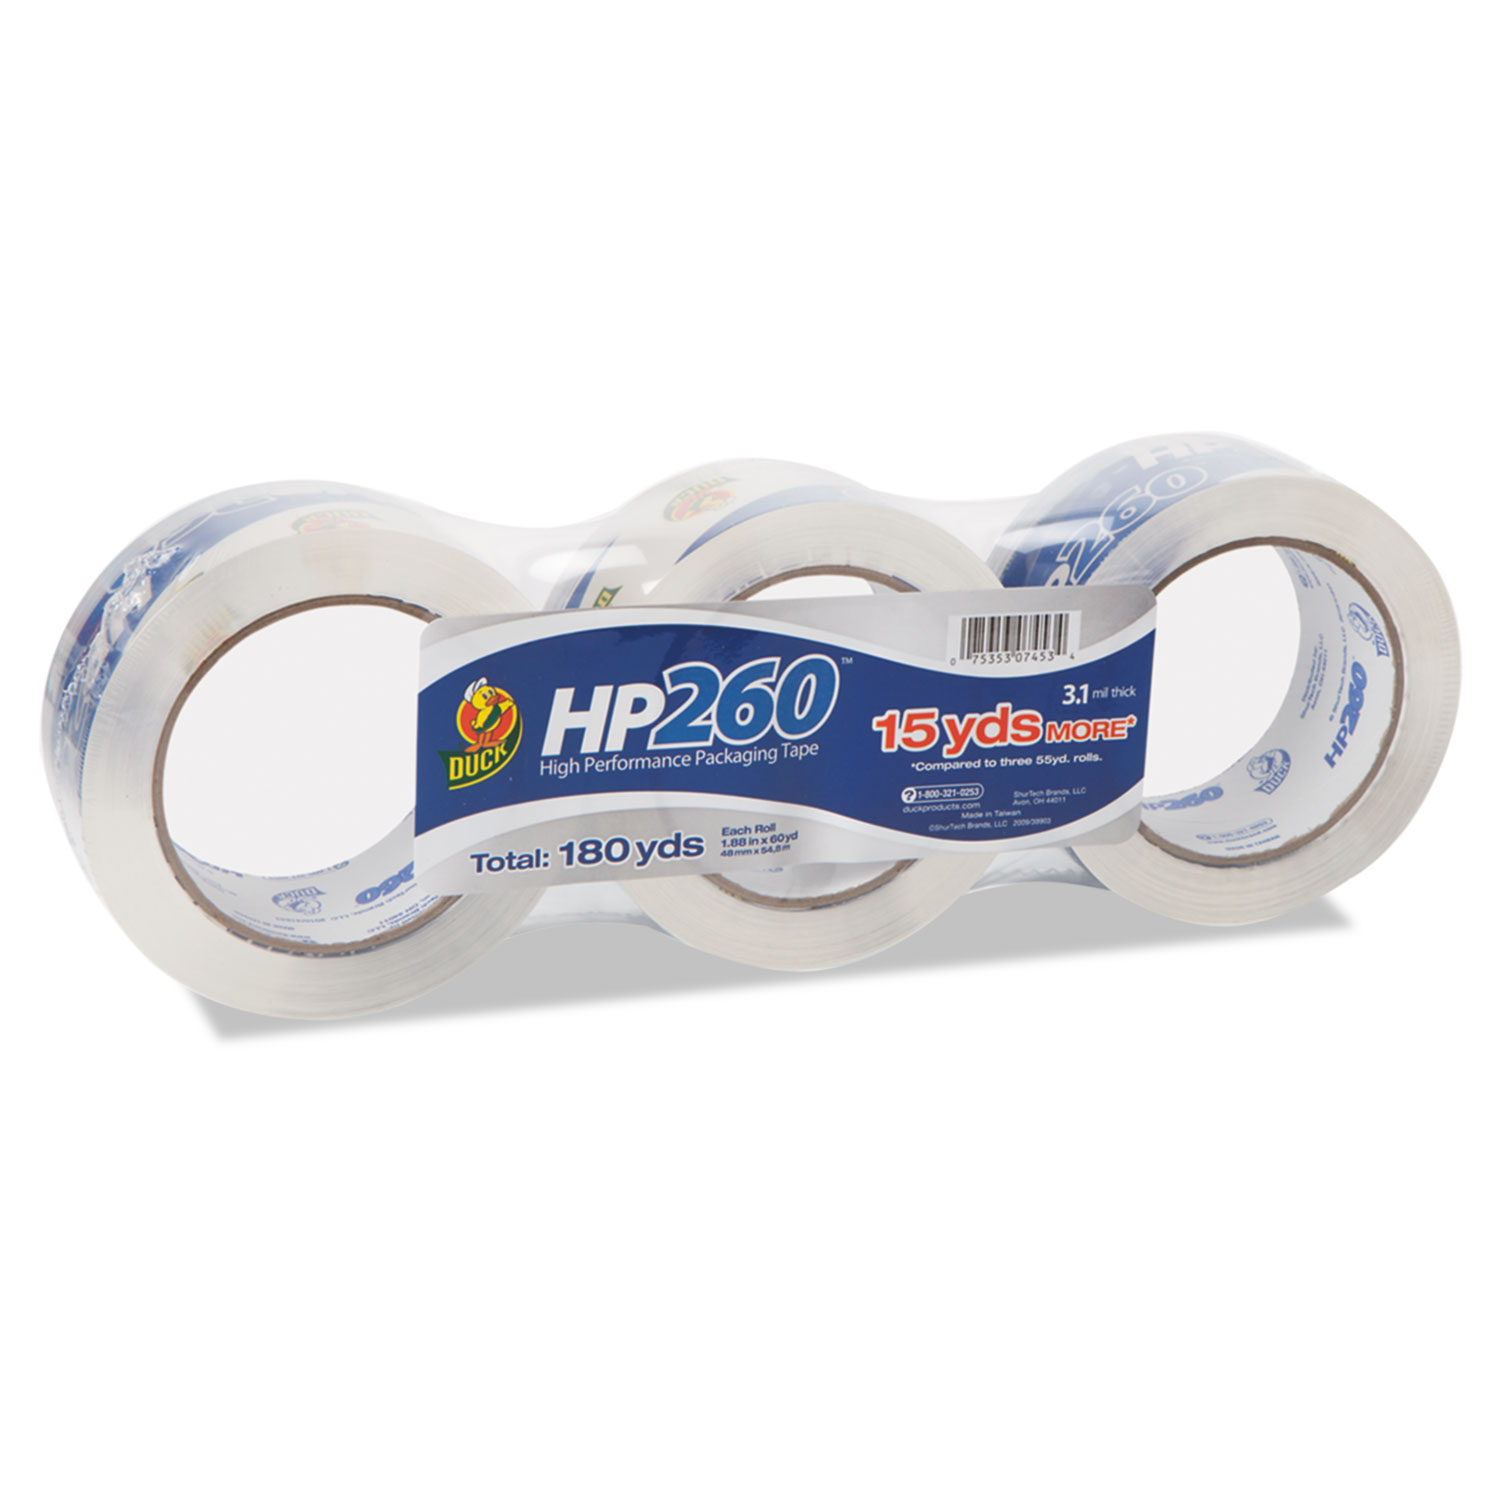  Duck HP260C-03 HP260 Packaging Tape, 3 Core, 1.88 x 60 yds, Clear, 3/Pack (DUCHP260C03) 